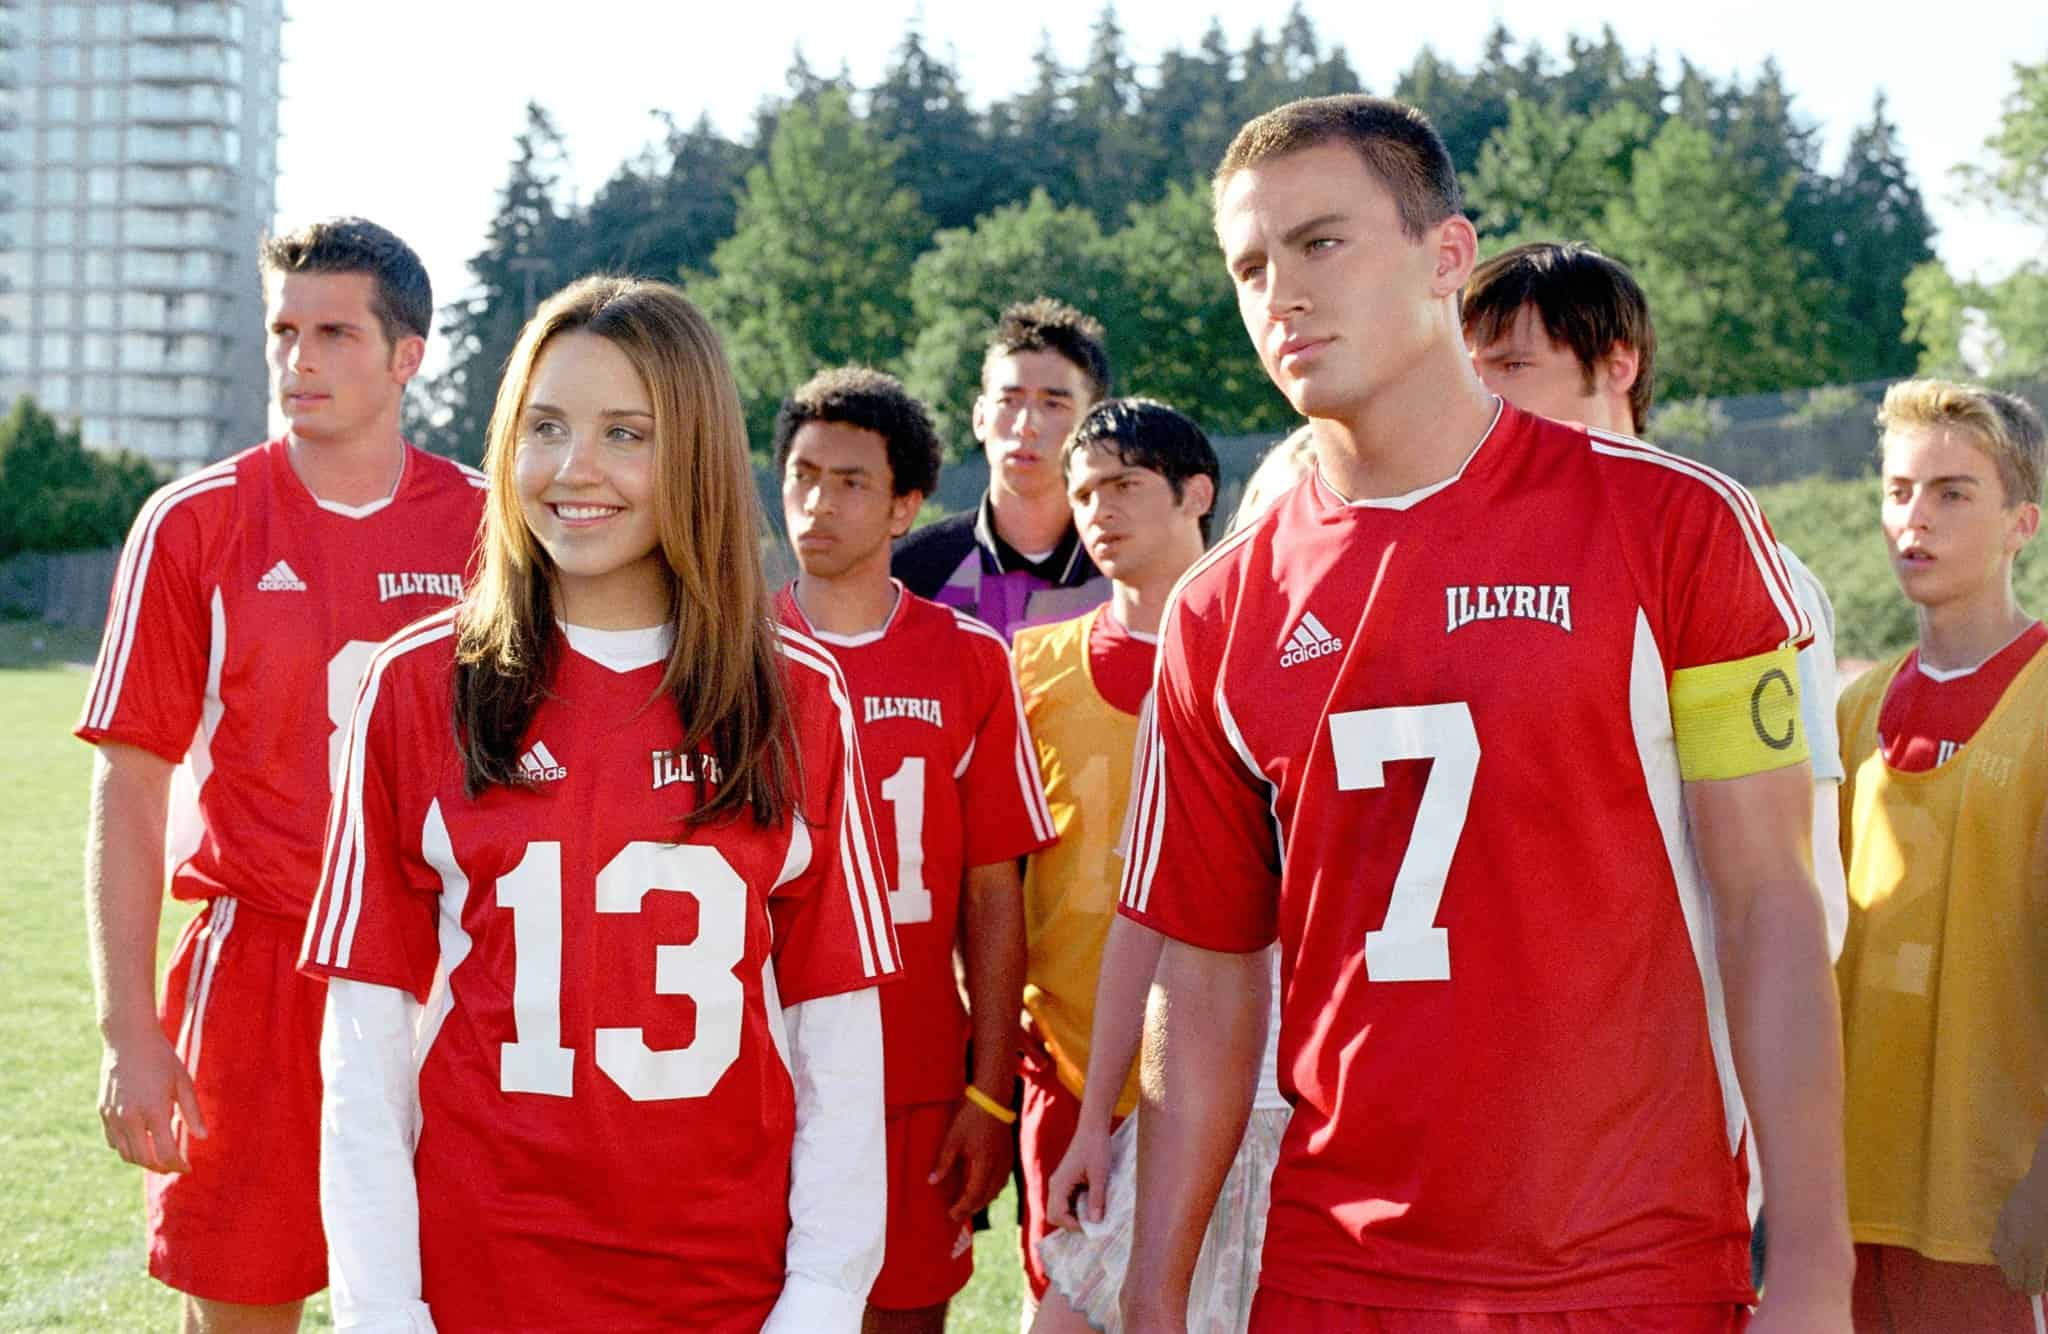 A girl plays on a boys’ soccer team in this image from DreamWorks Pictures.